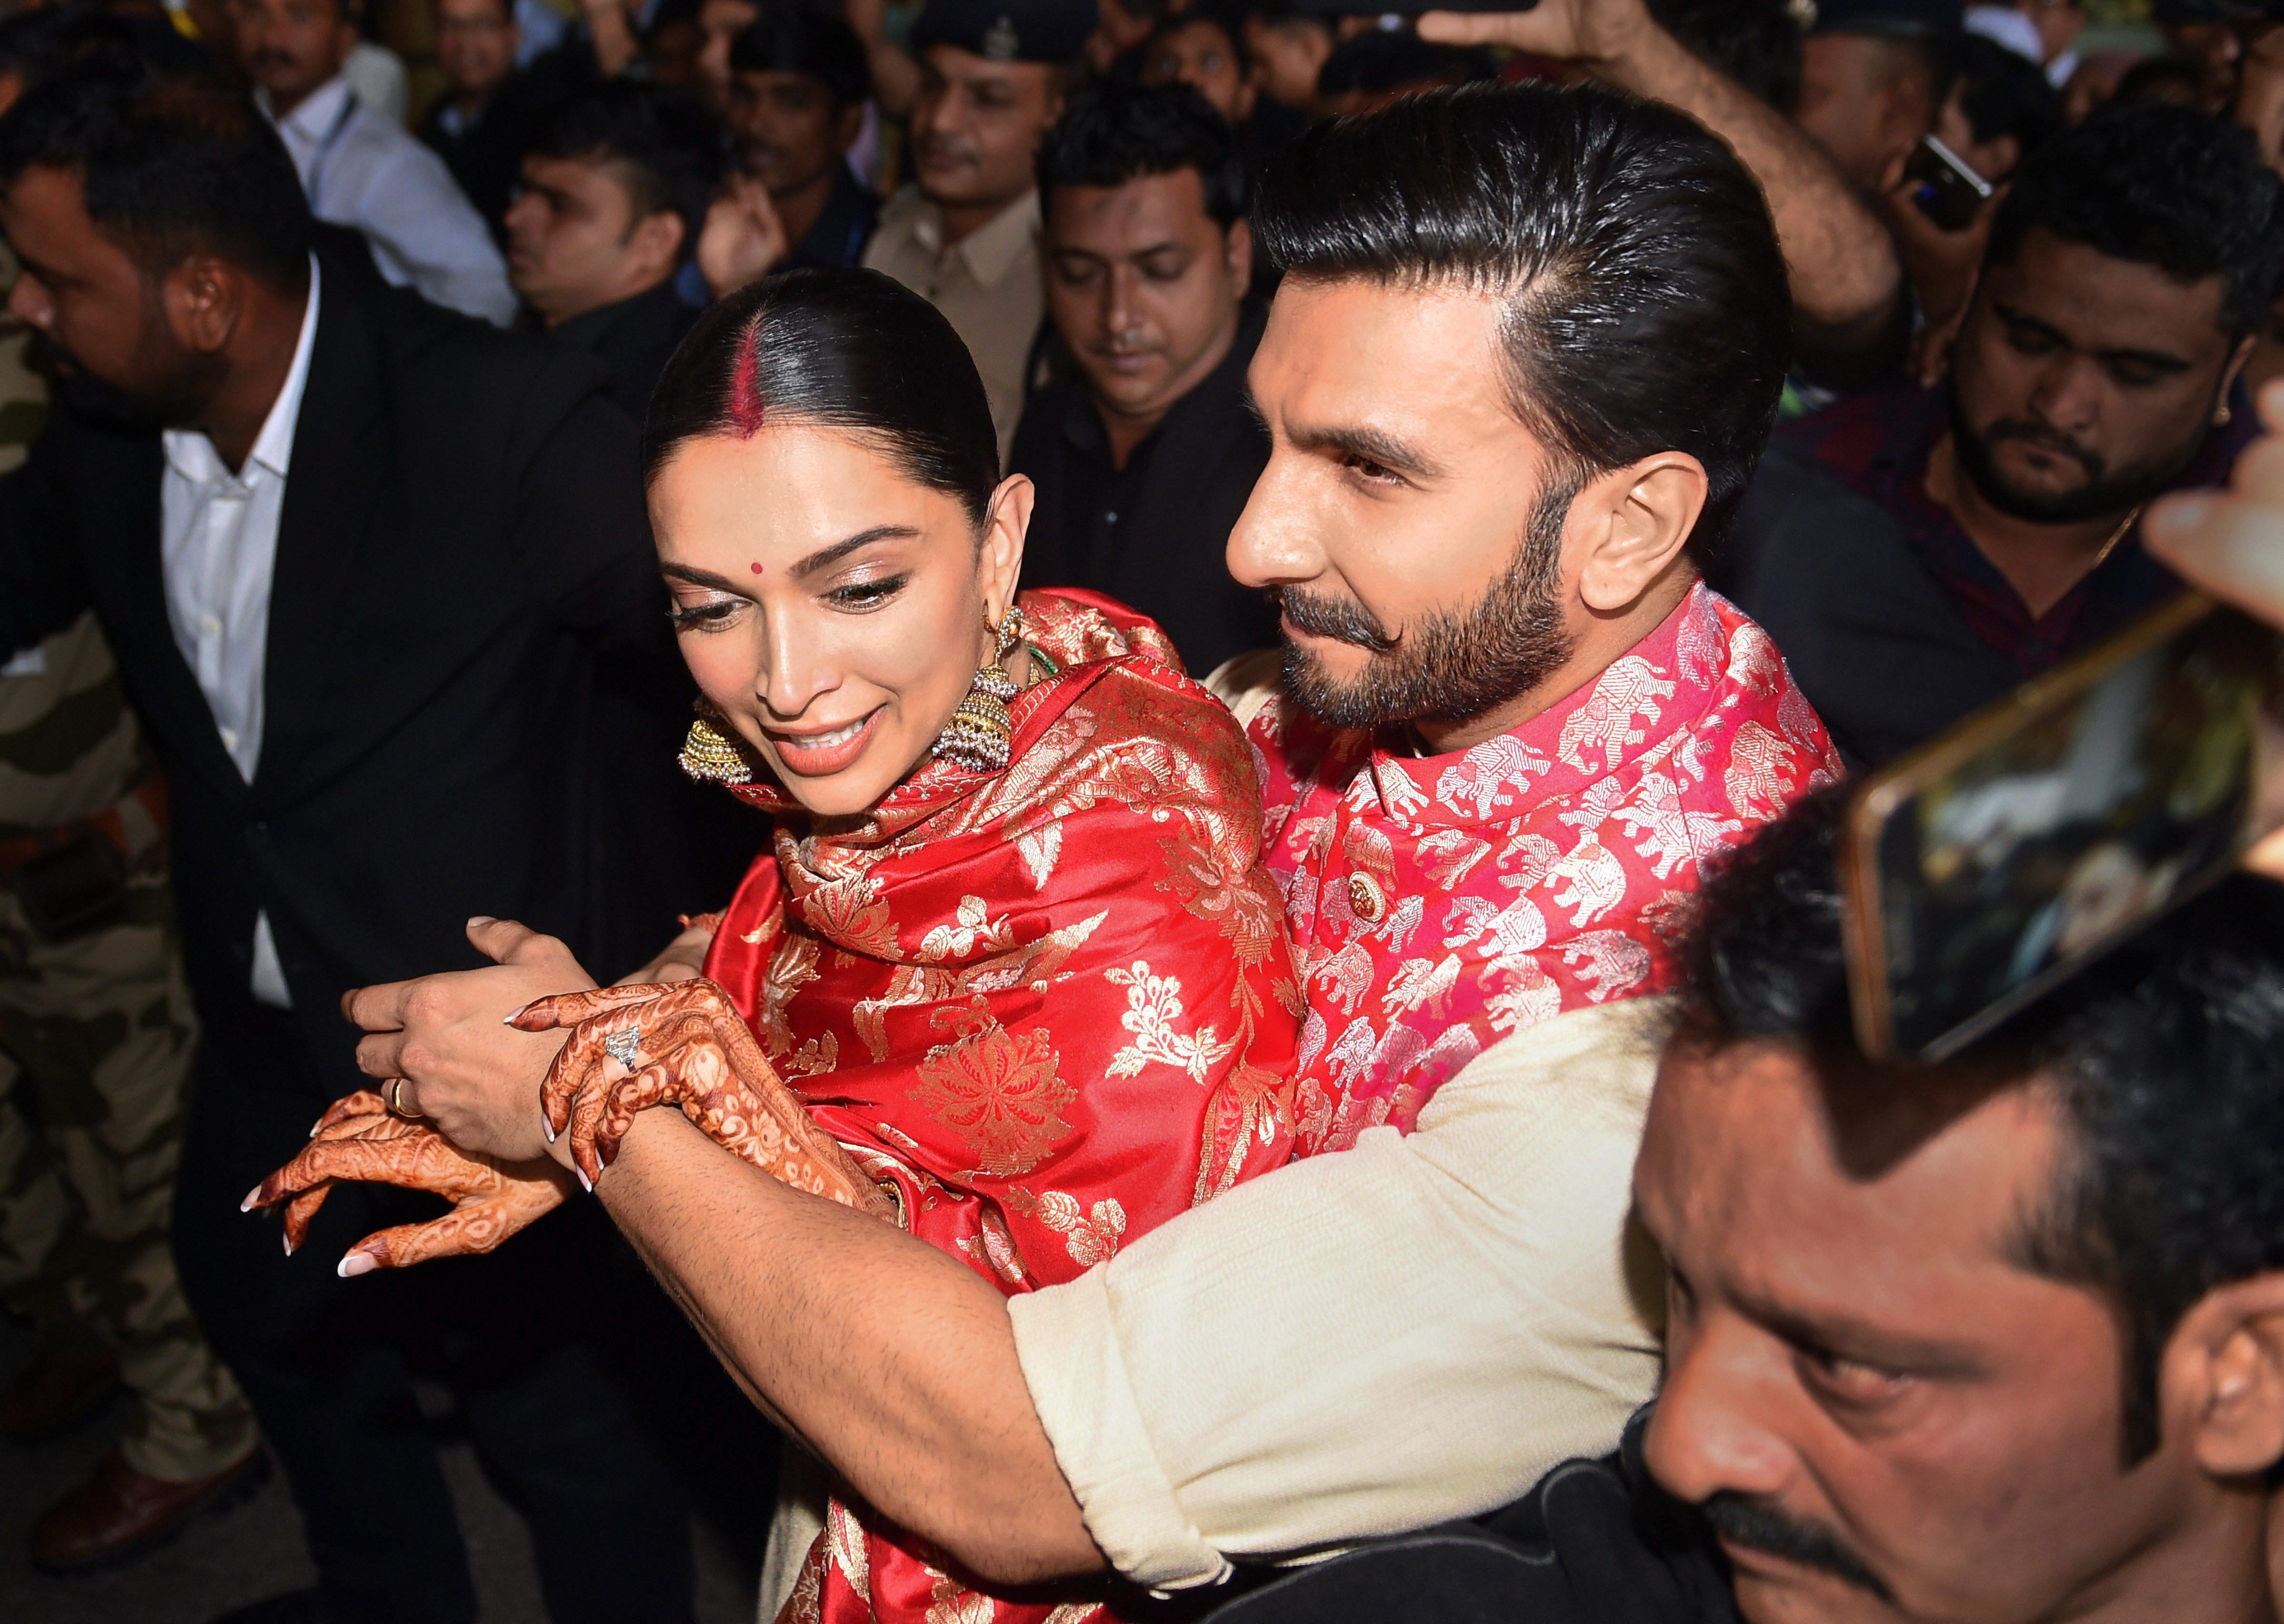 Ranveer Singh Guarding Deepika Padukone From Paparazzi is the Most Adorable Thing You'll See Today